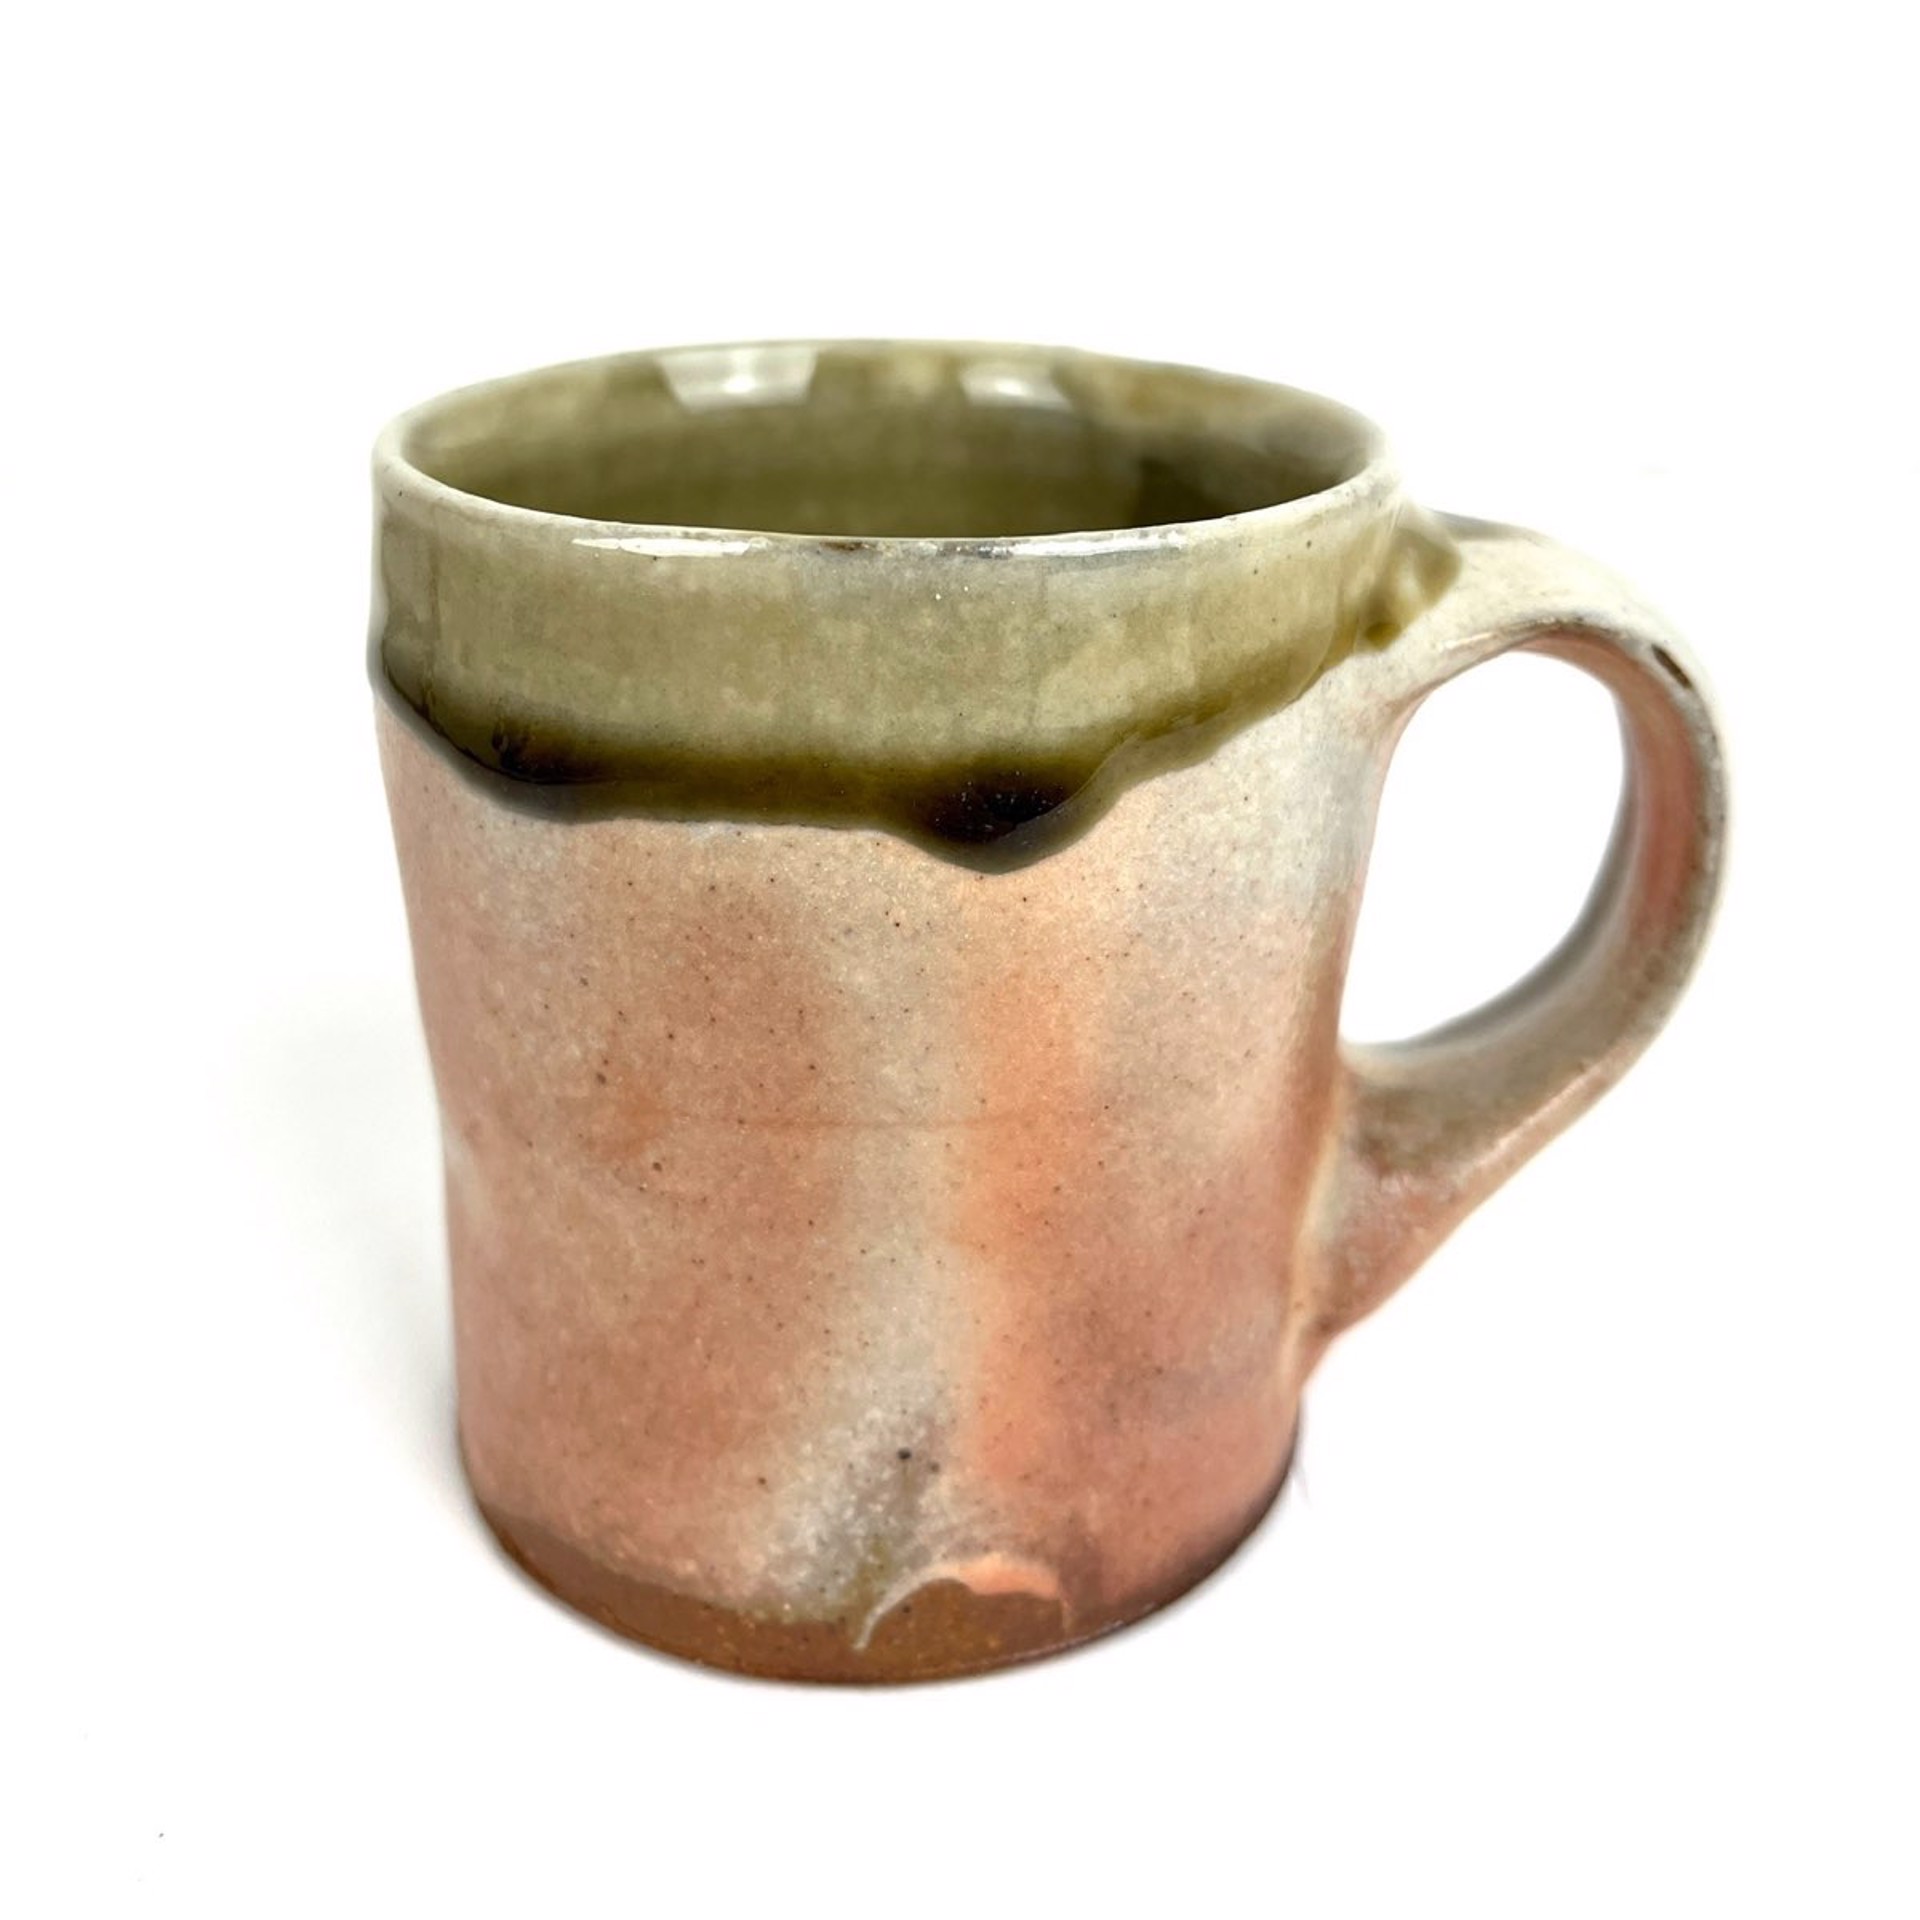 Wood-Fired Cup by Mitch Yung